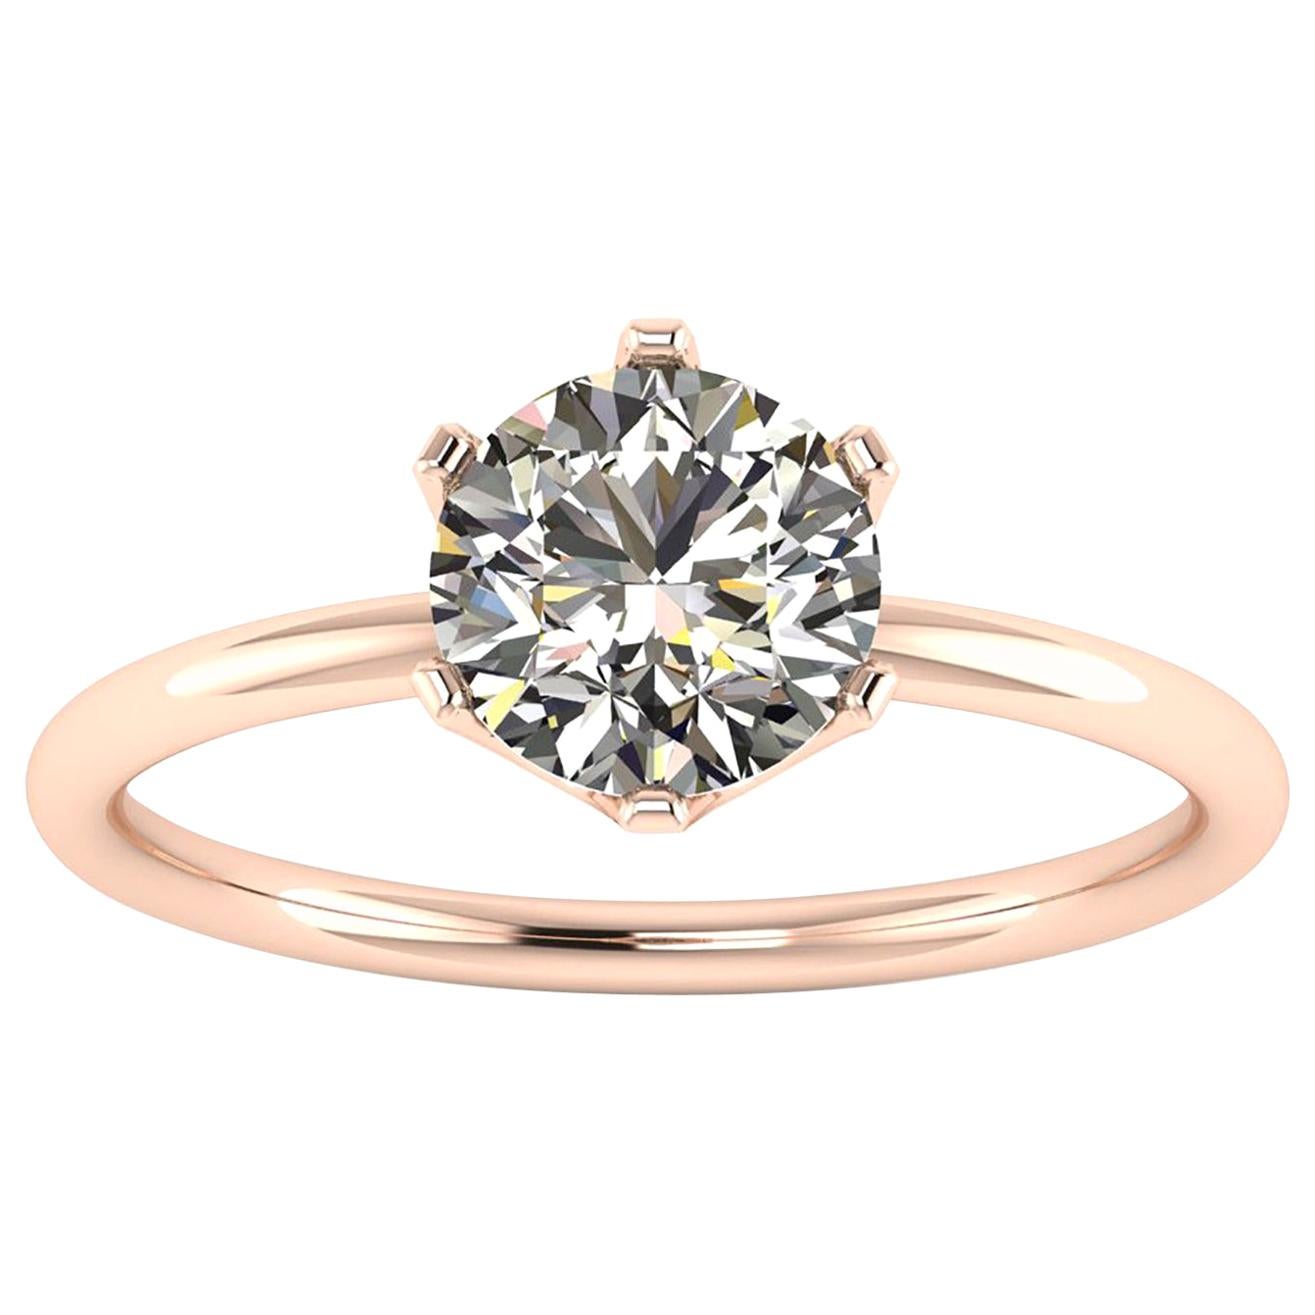 GIA Certified 1.01 Carat White Diamond in 18 Rose Gold Solitaire Engagement Ring